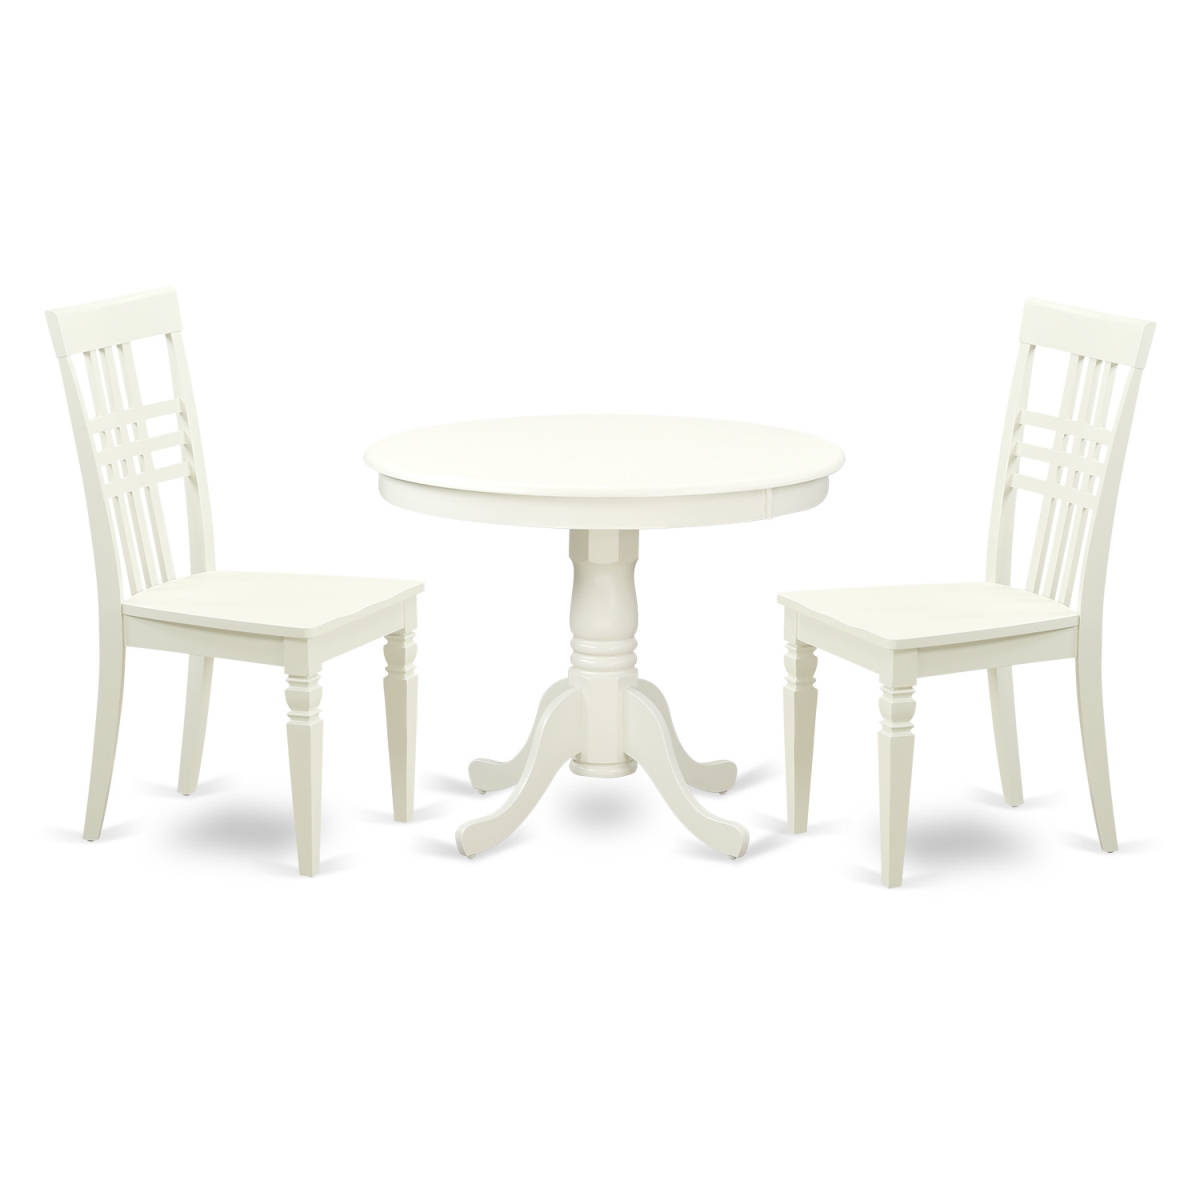 Picture of East West Furniture ANLG3-LWH-W Dining Set - 1 Kitchen Table & 2 Wood Chairs, Linen White - 3 Piece